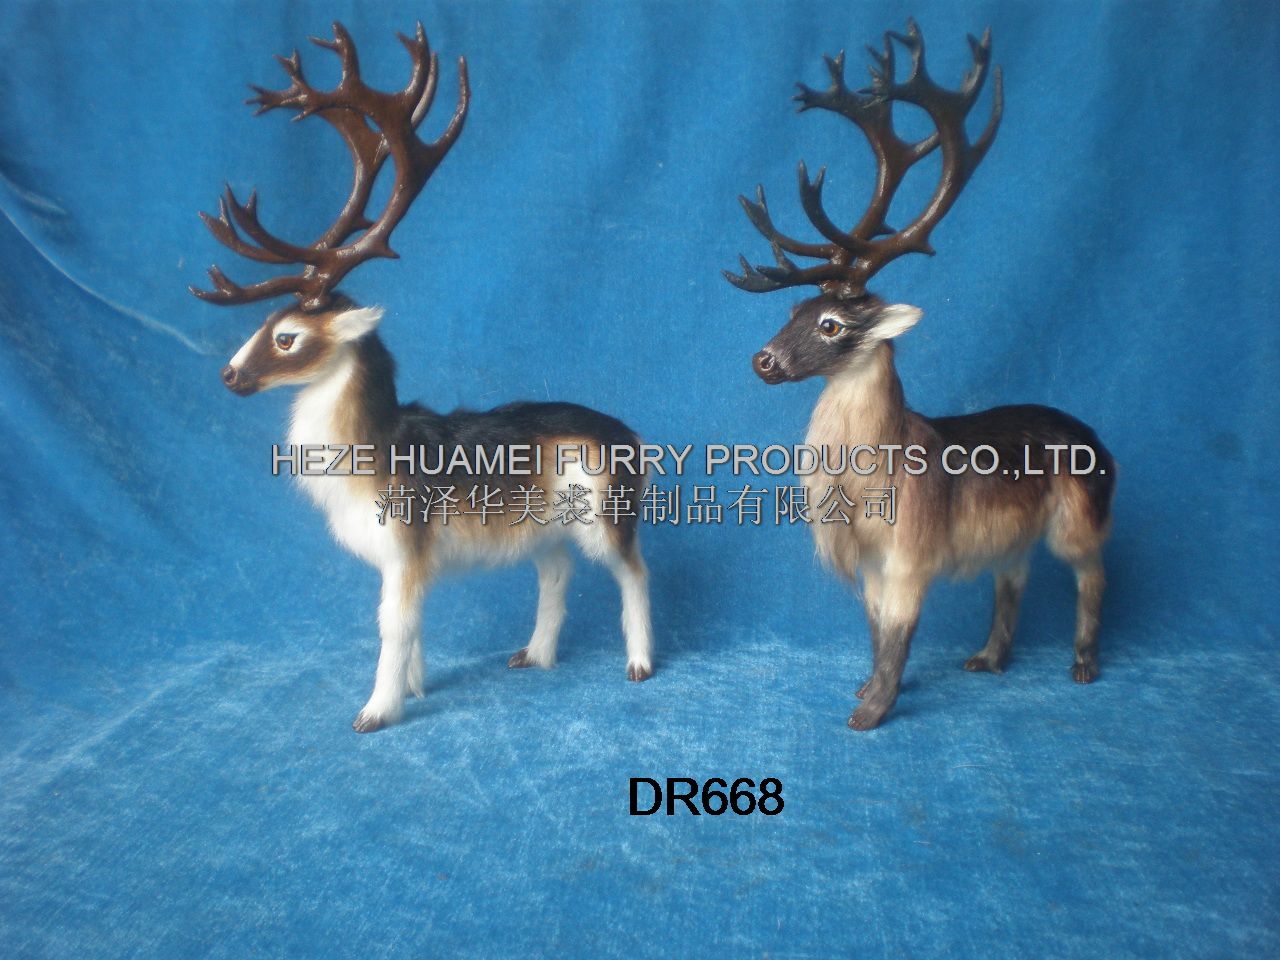 DR668,HEZE YUHANG FURRY PRODUCTS CO., LTD.